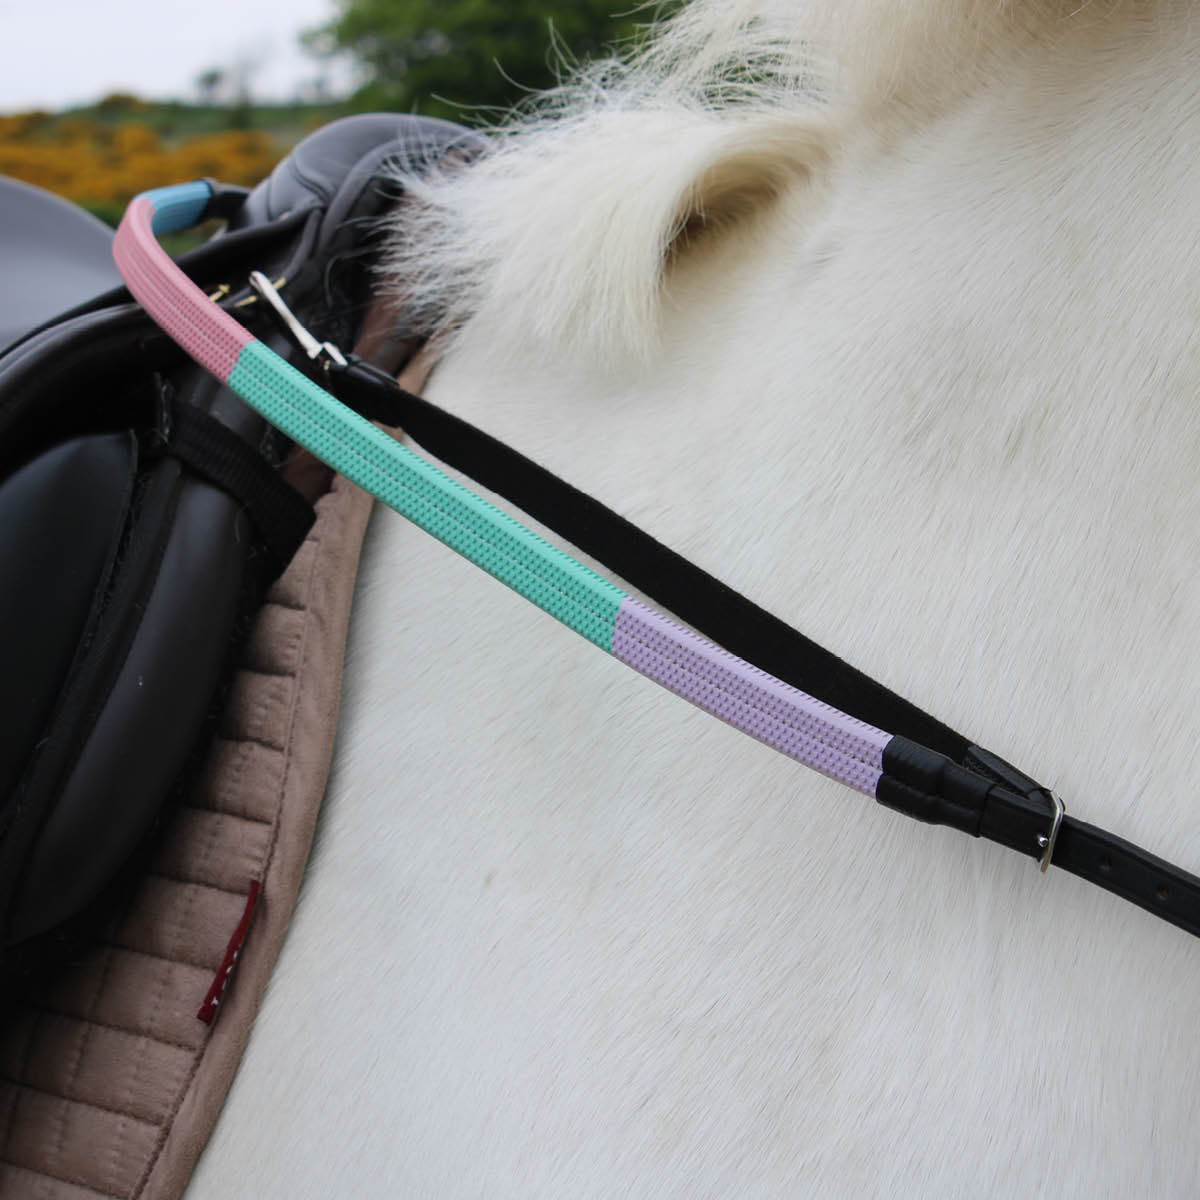 Full Rubber Coloured Training Horse Reins - Balanced Support Reins